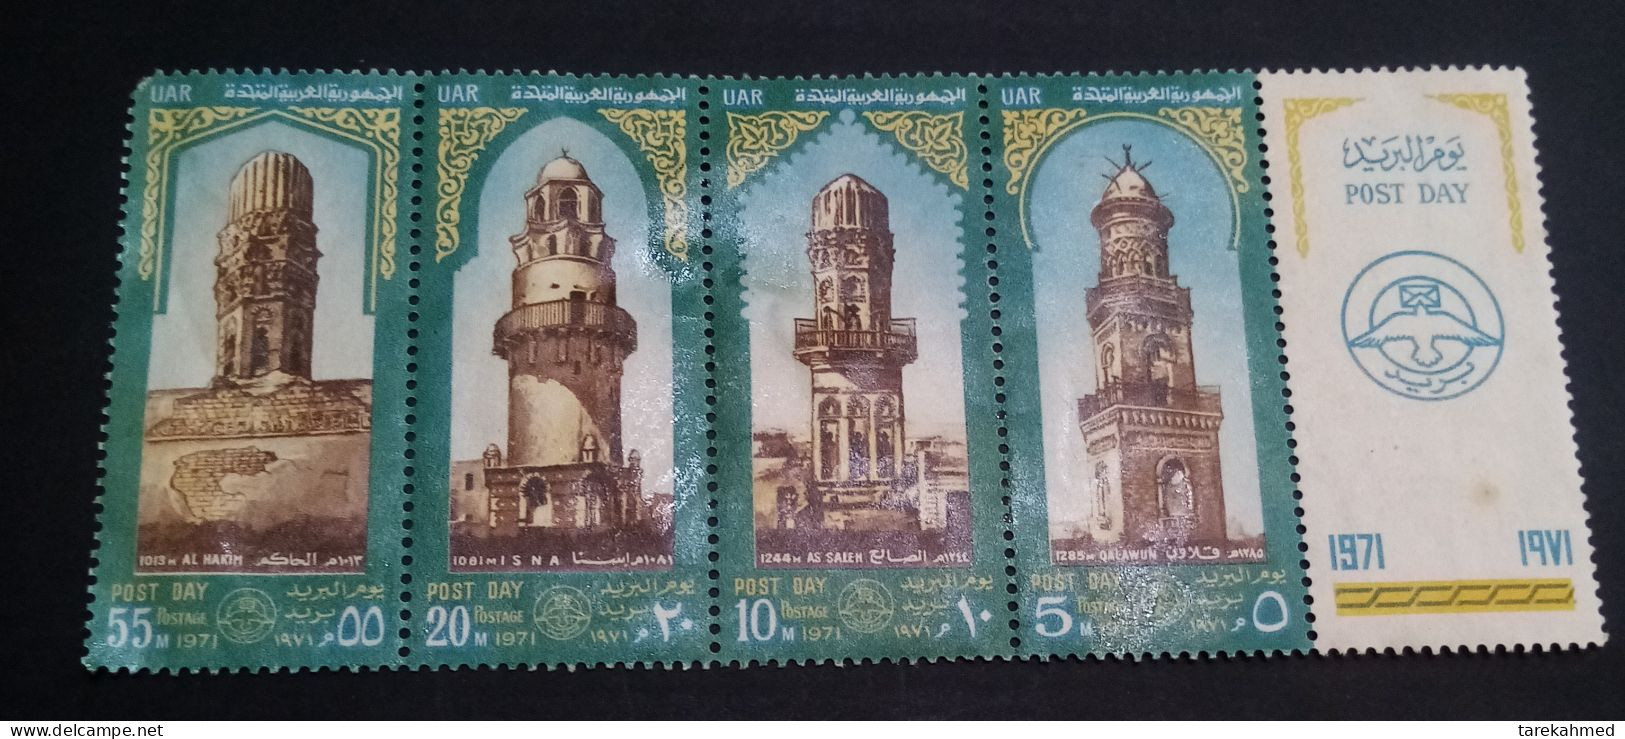 Egypt 1971 , Complete Mint SET Of The Post Day , Old Mosques Minarets , Sc 912-15 With Label . MH - Nuevos